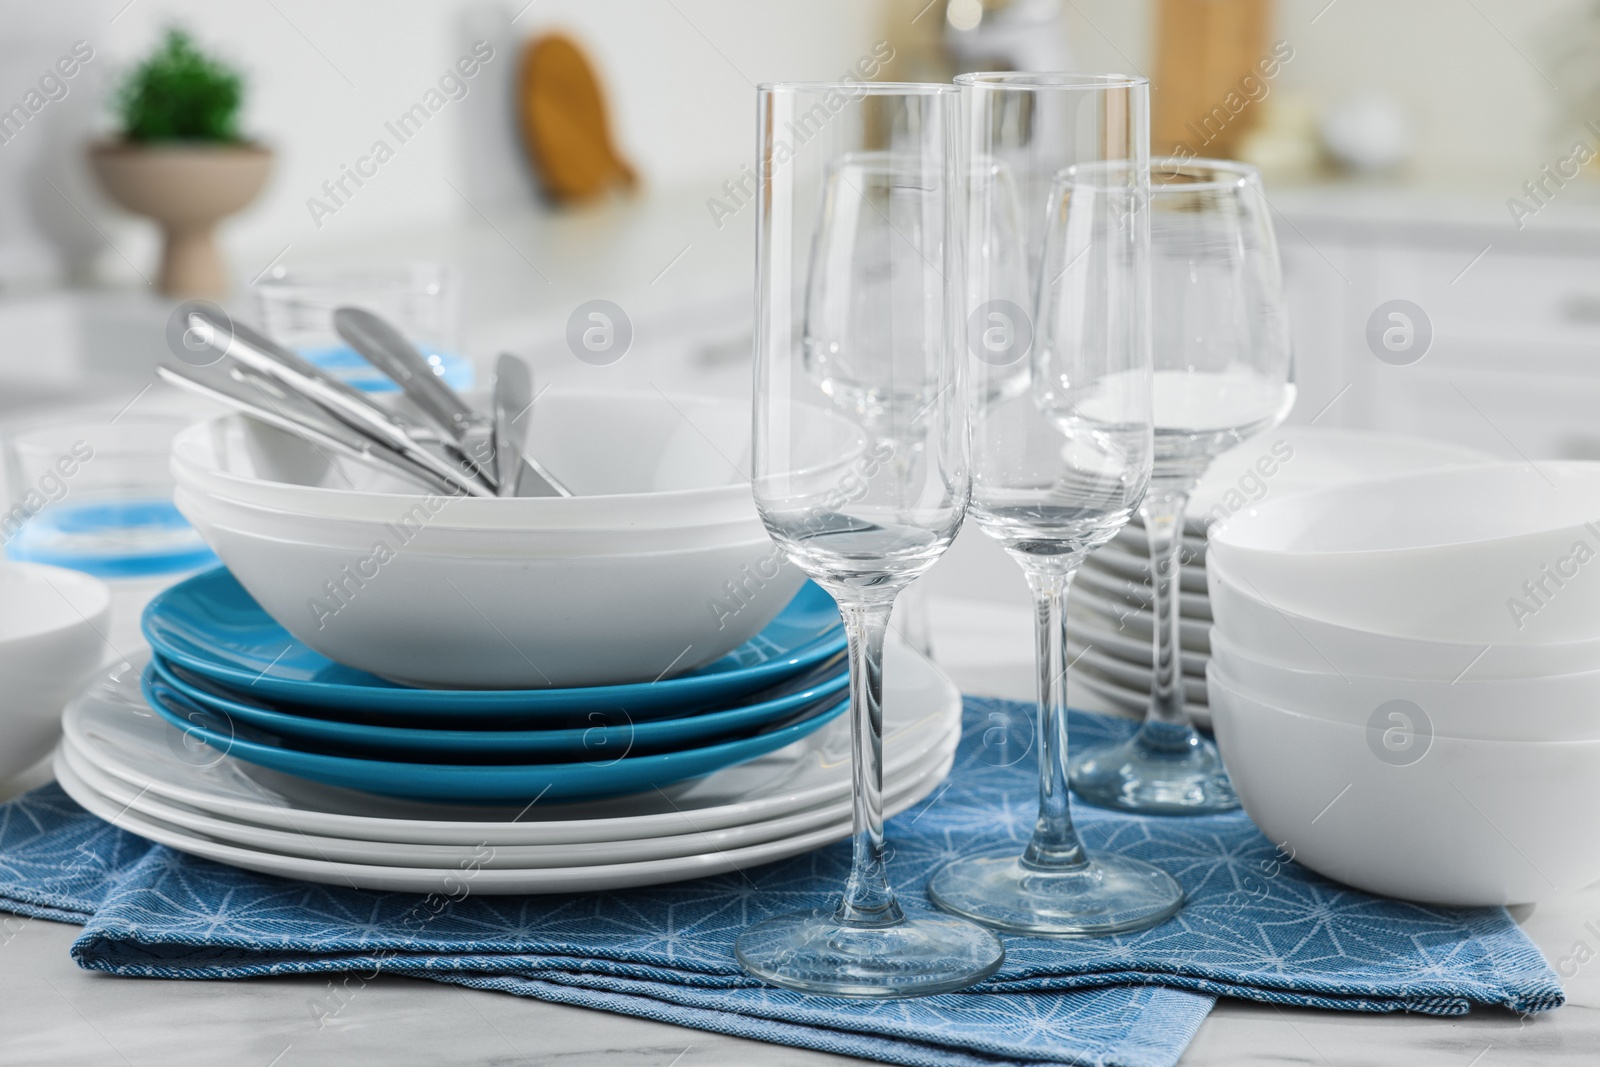 Photo of Different clean dishware, cutlery and glasses on white table in kitchen, closeup